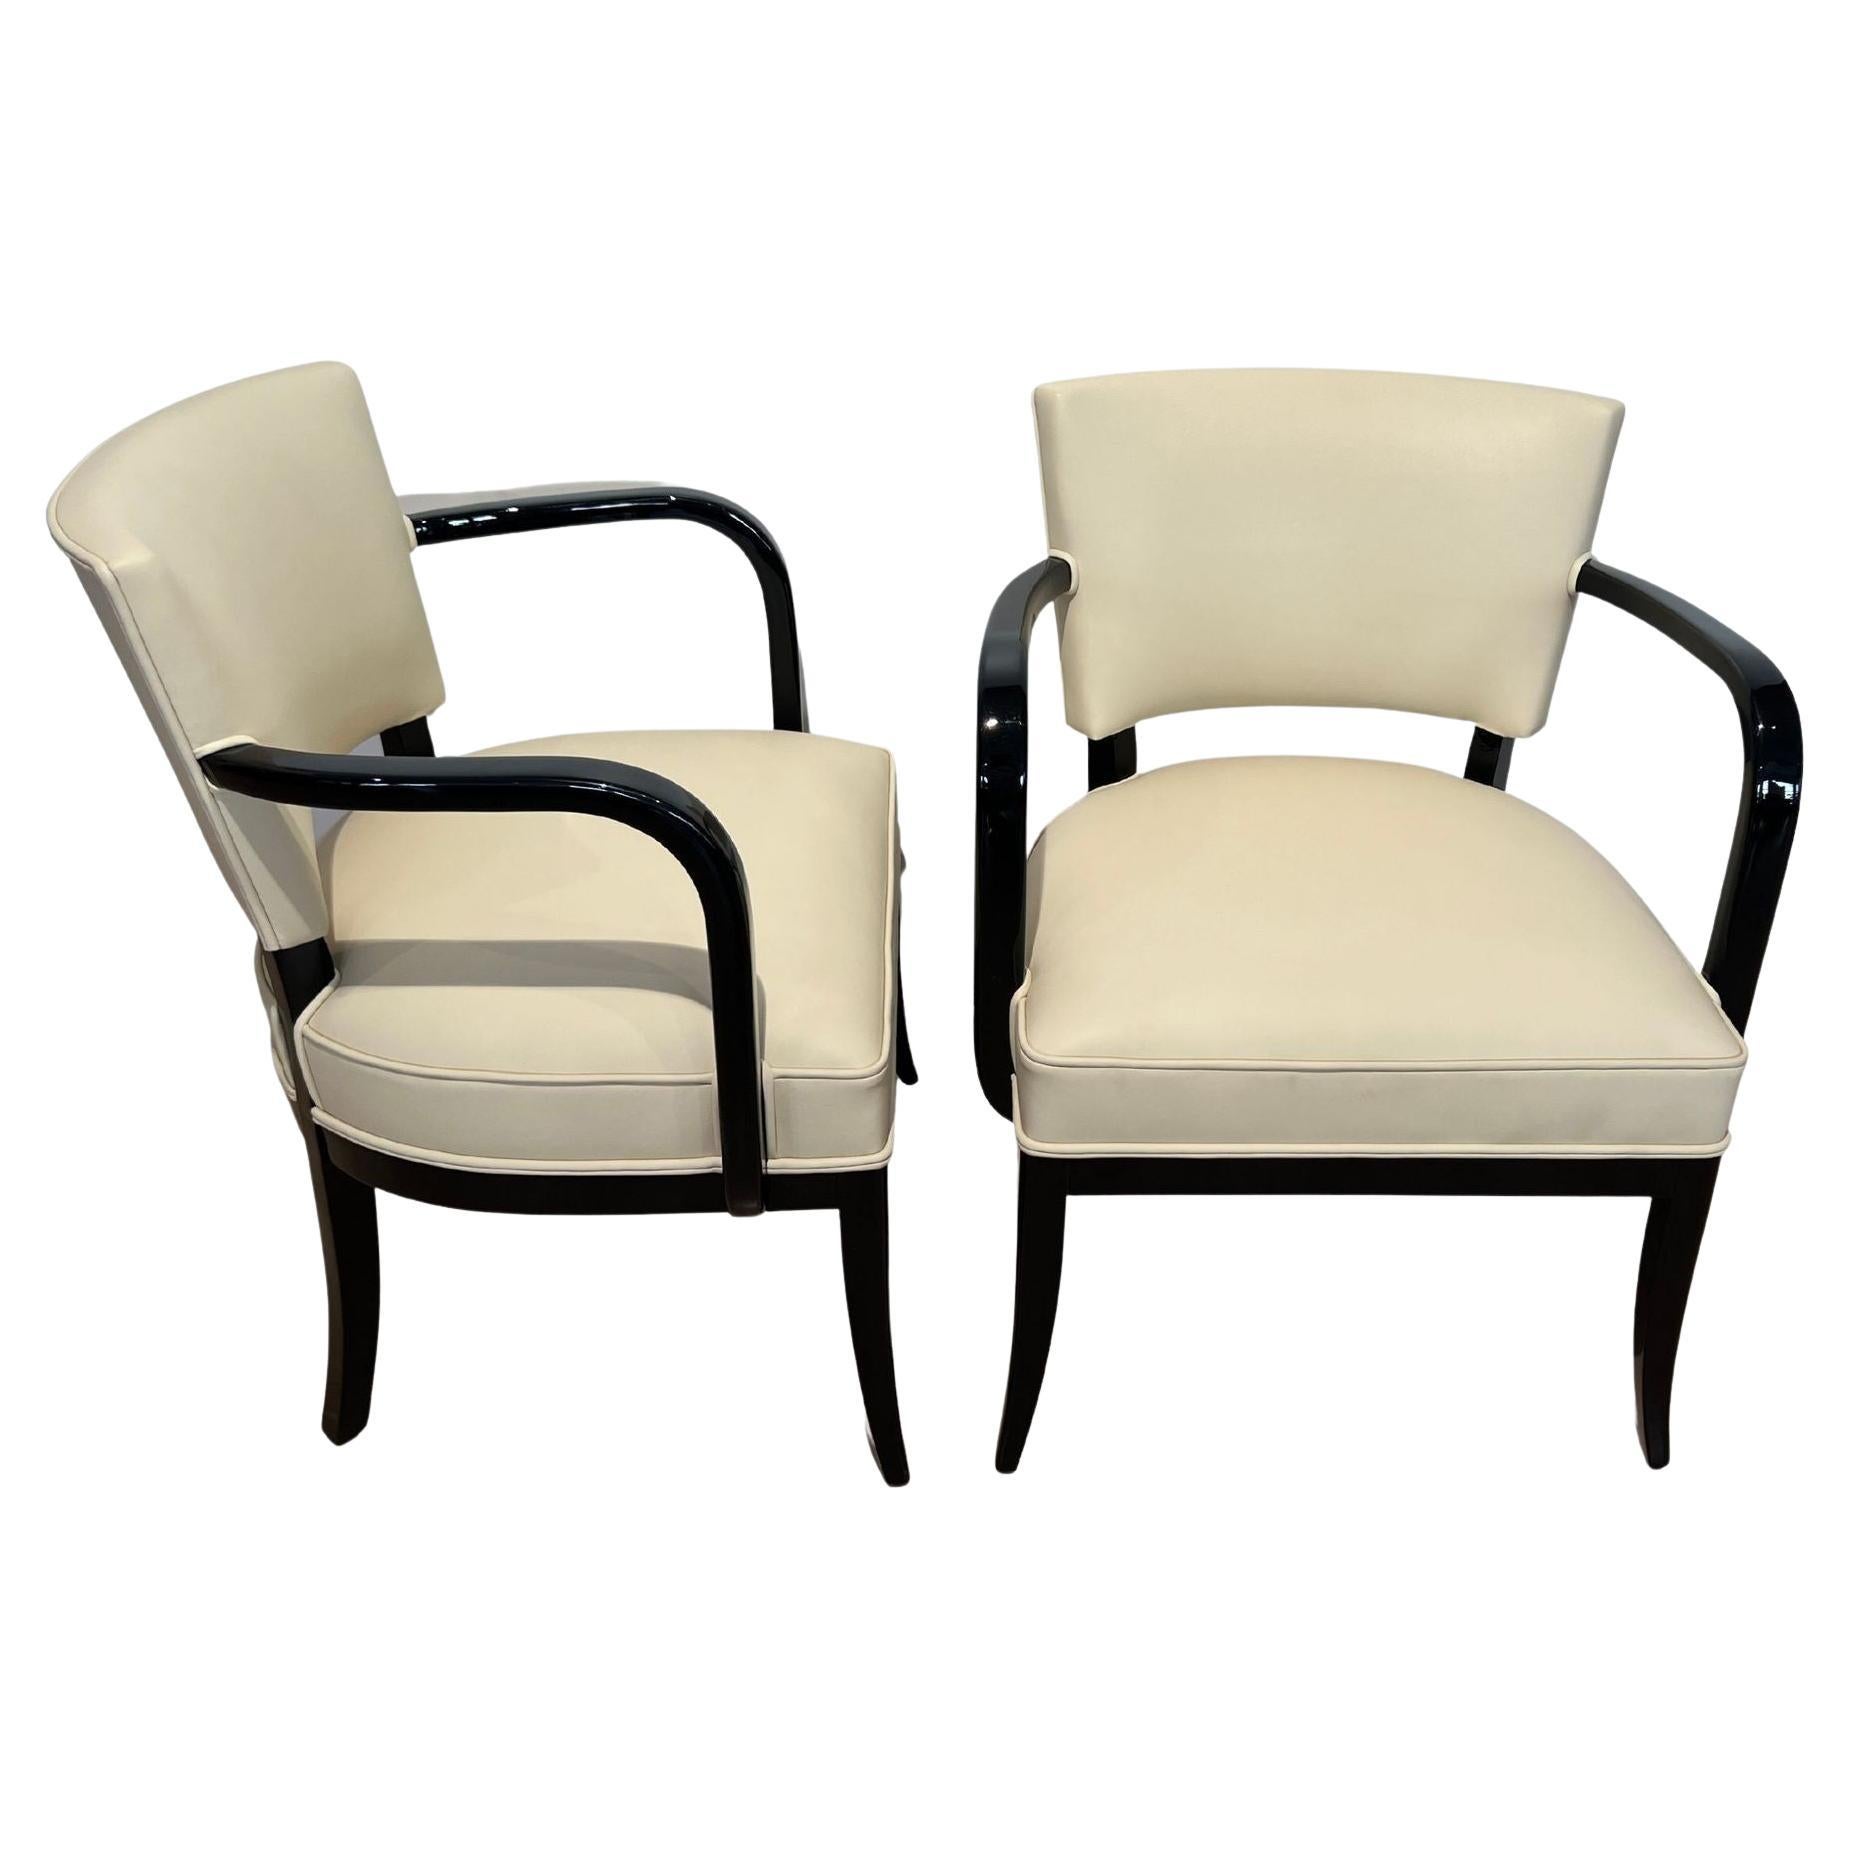 Pair of Art Deco Armchairs, Black Lacquer, Creme Leather, France, 1930s For Sale